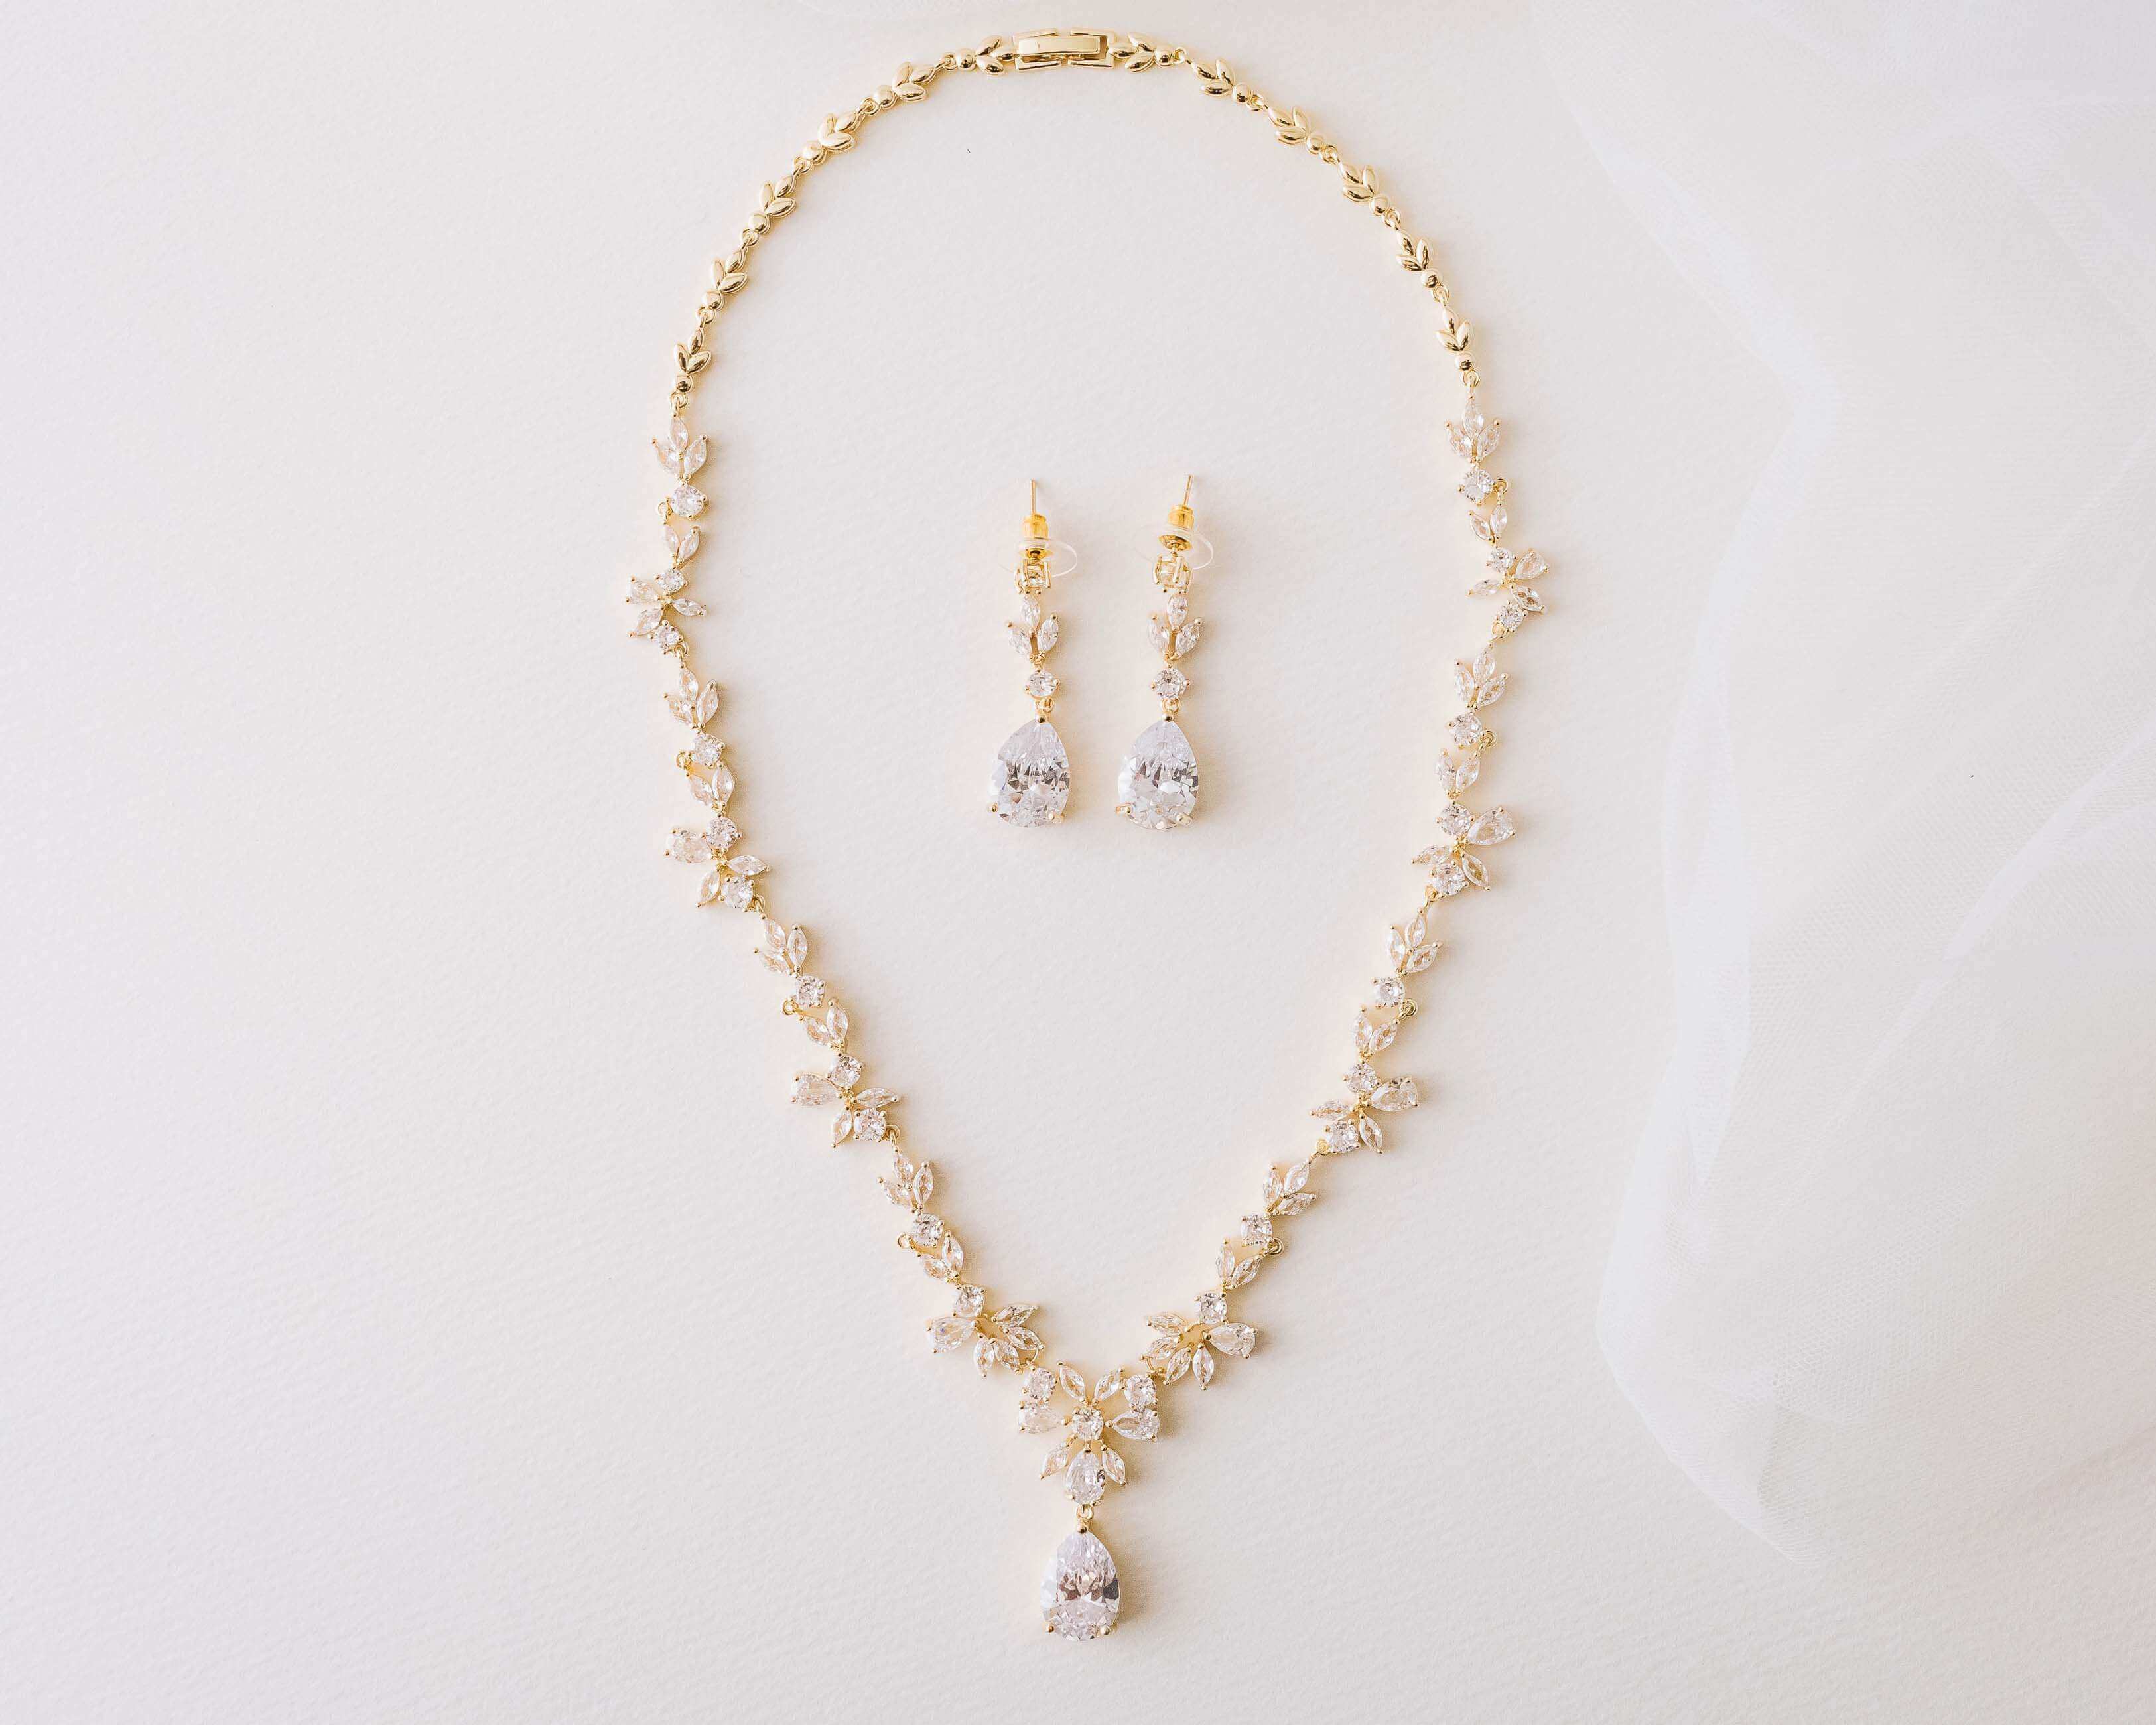 Gold Crystal Bridal Necklace Earrings Set - The perfect wedding jewelry.